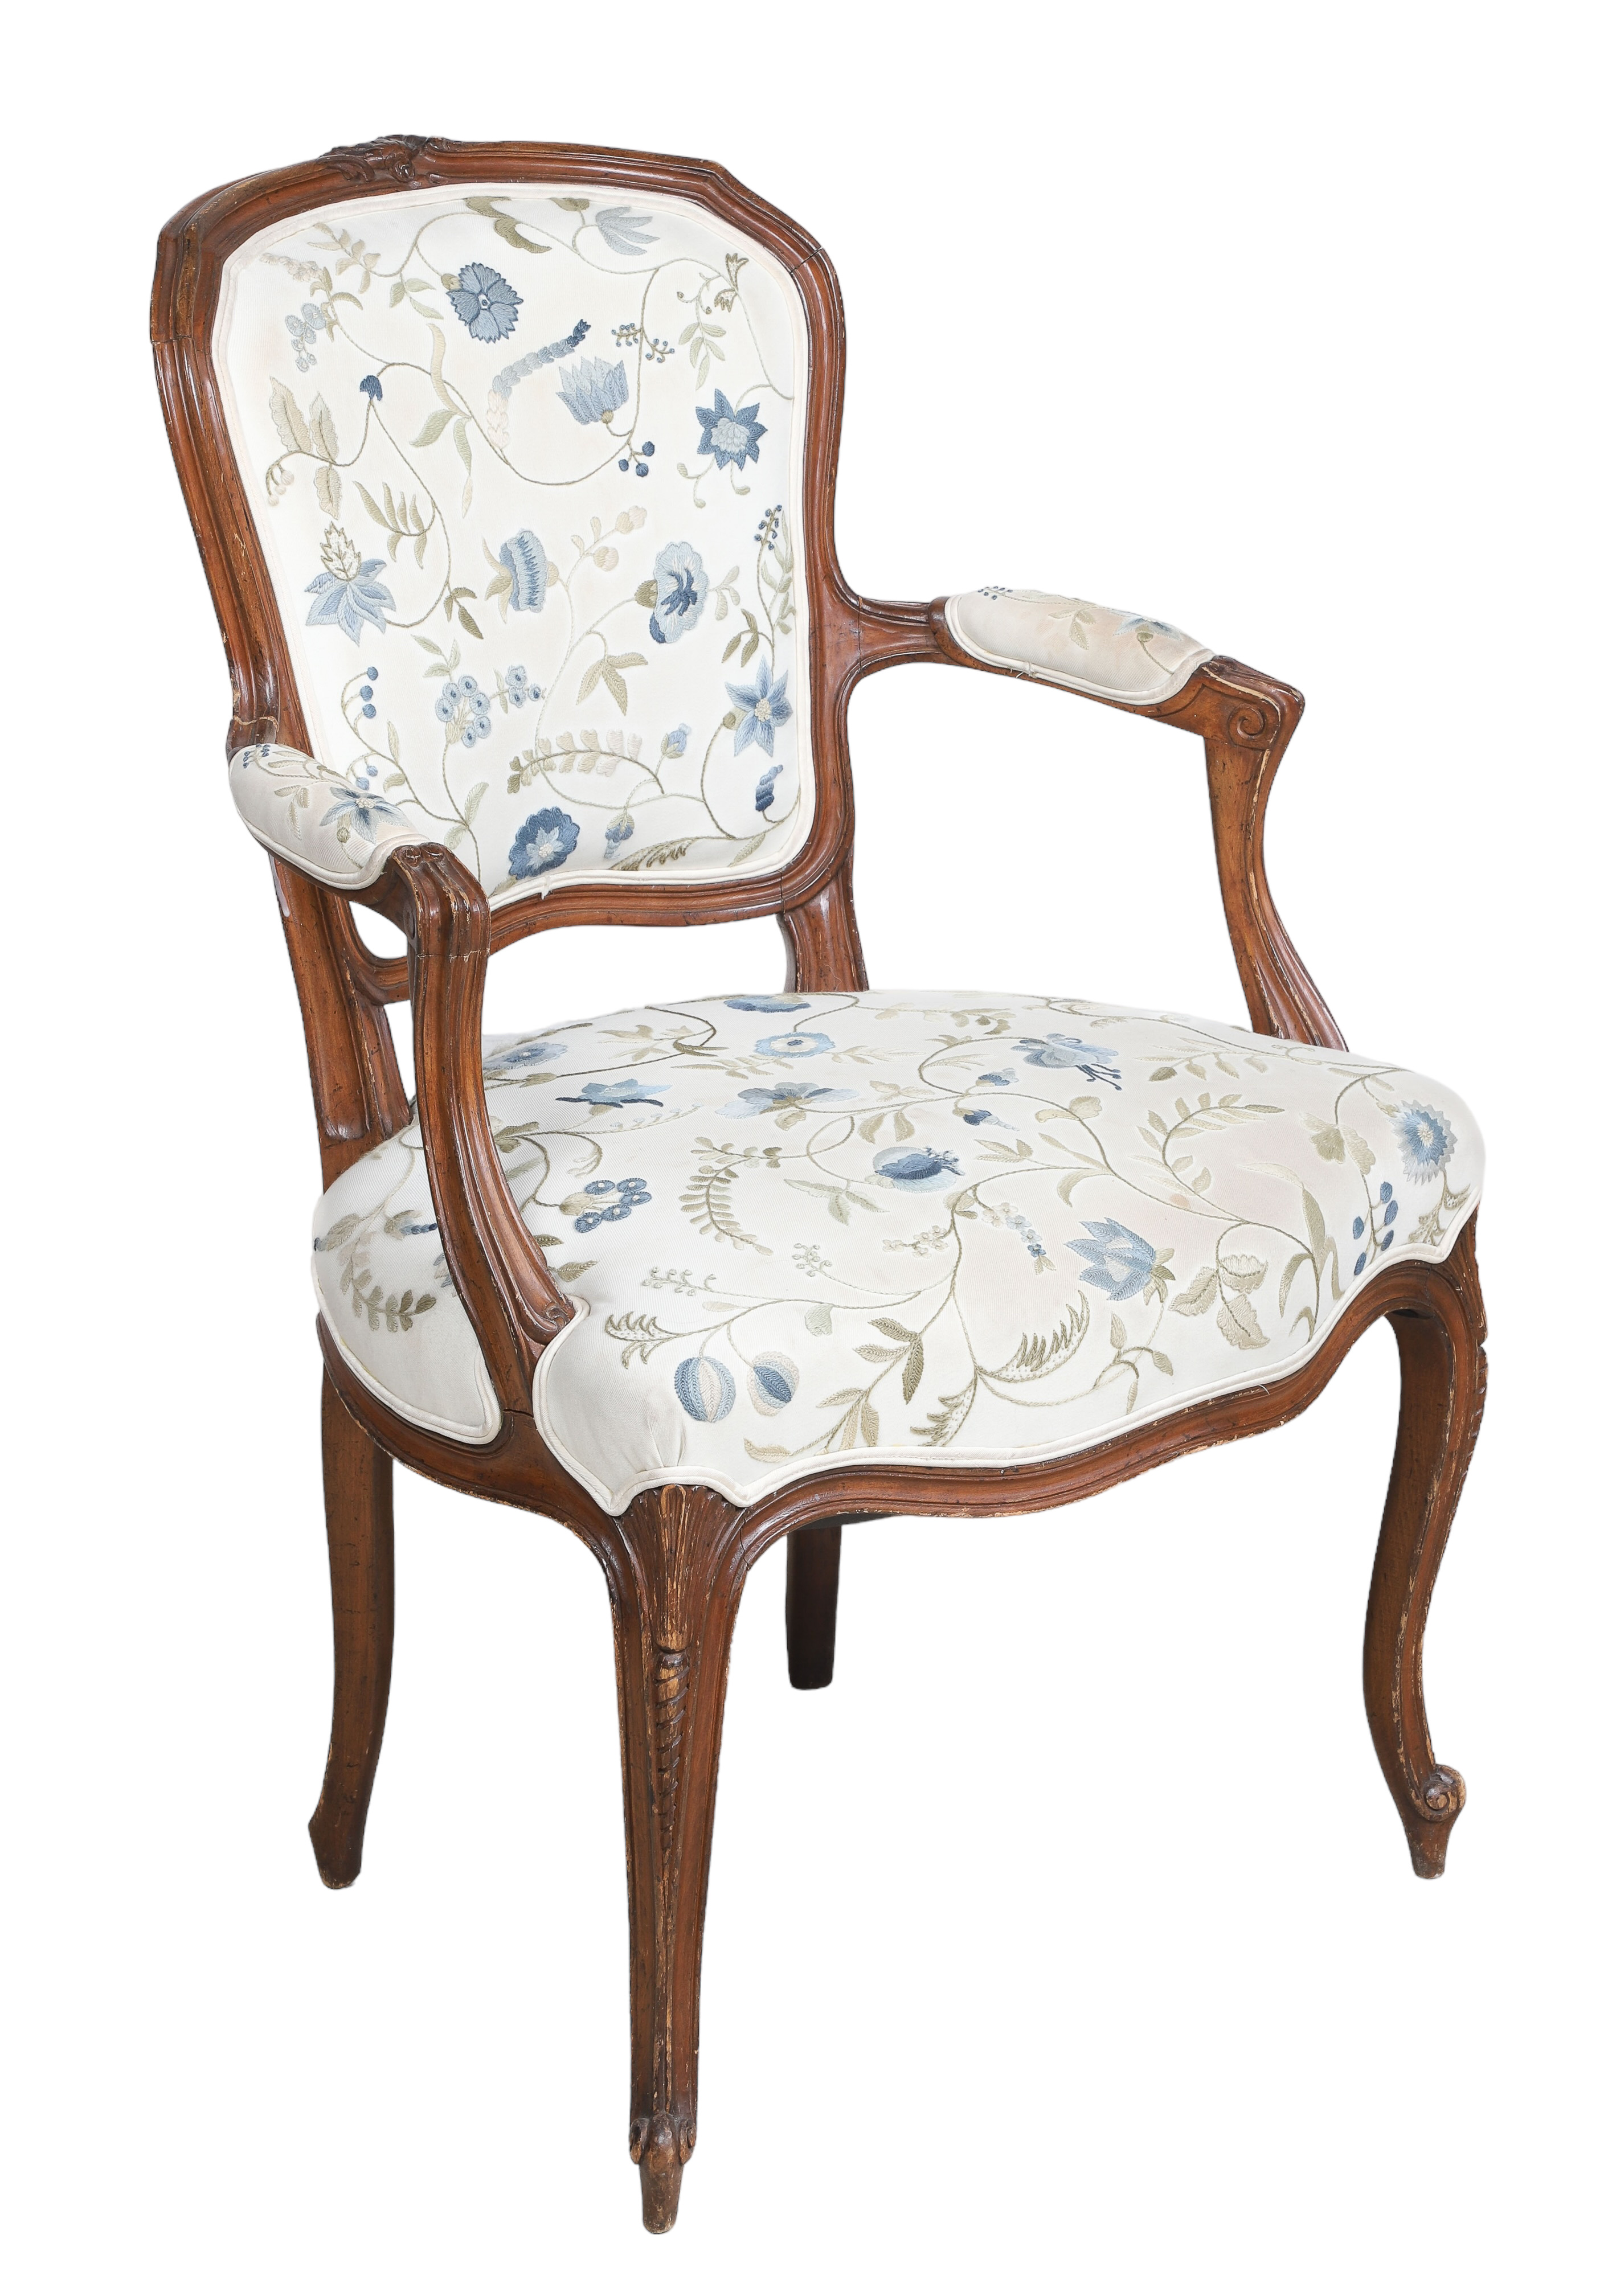 Louis XV Style Fauteuil with Embroidered 2e1b99